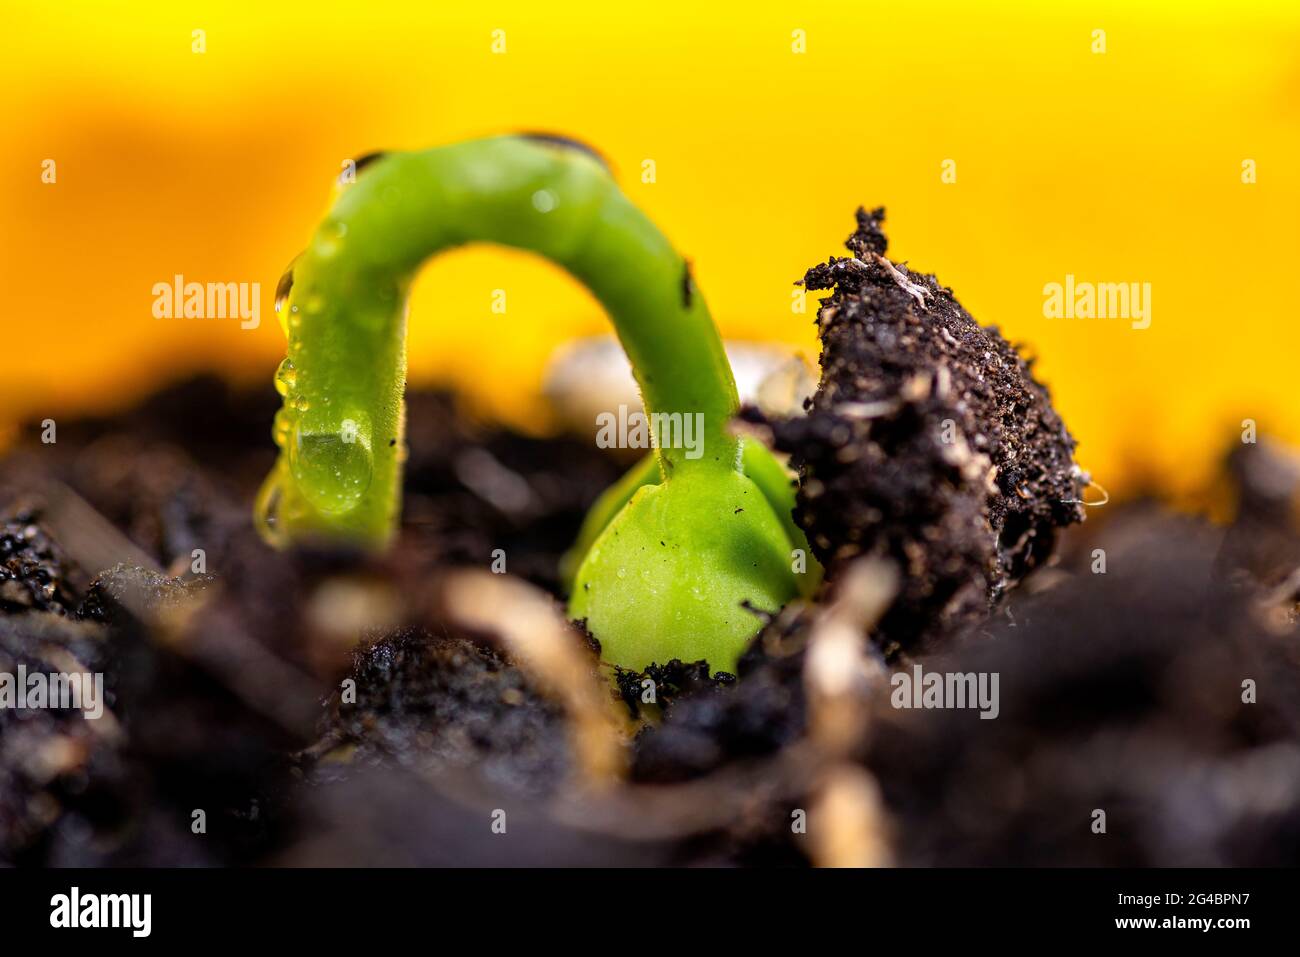 Macro photo of sprouting white beans with wrapped leaves coming out of the ground in a yellow pot. Stock Photo